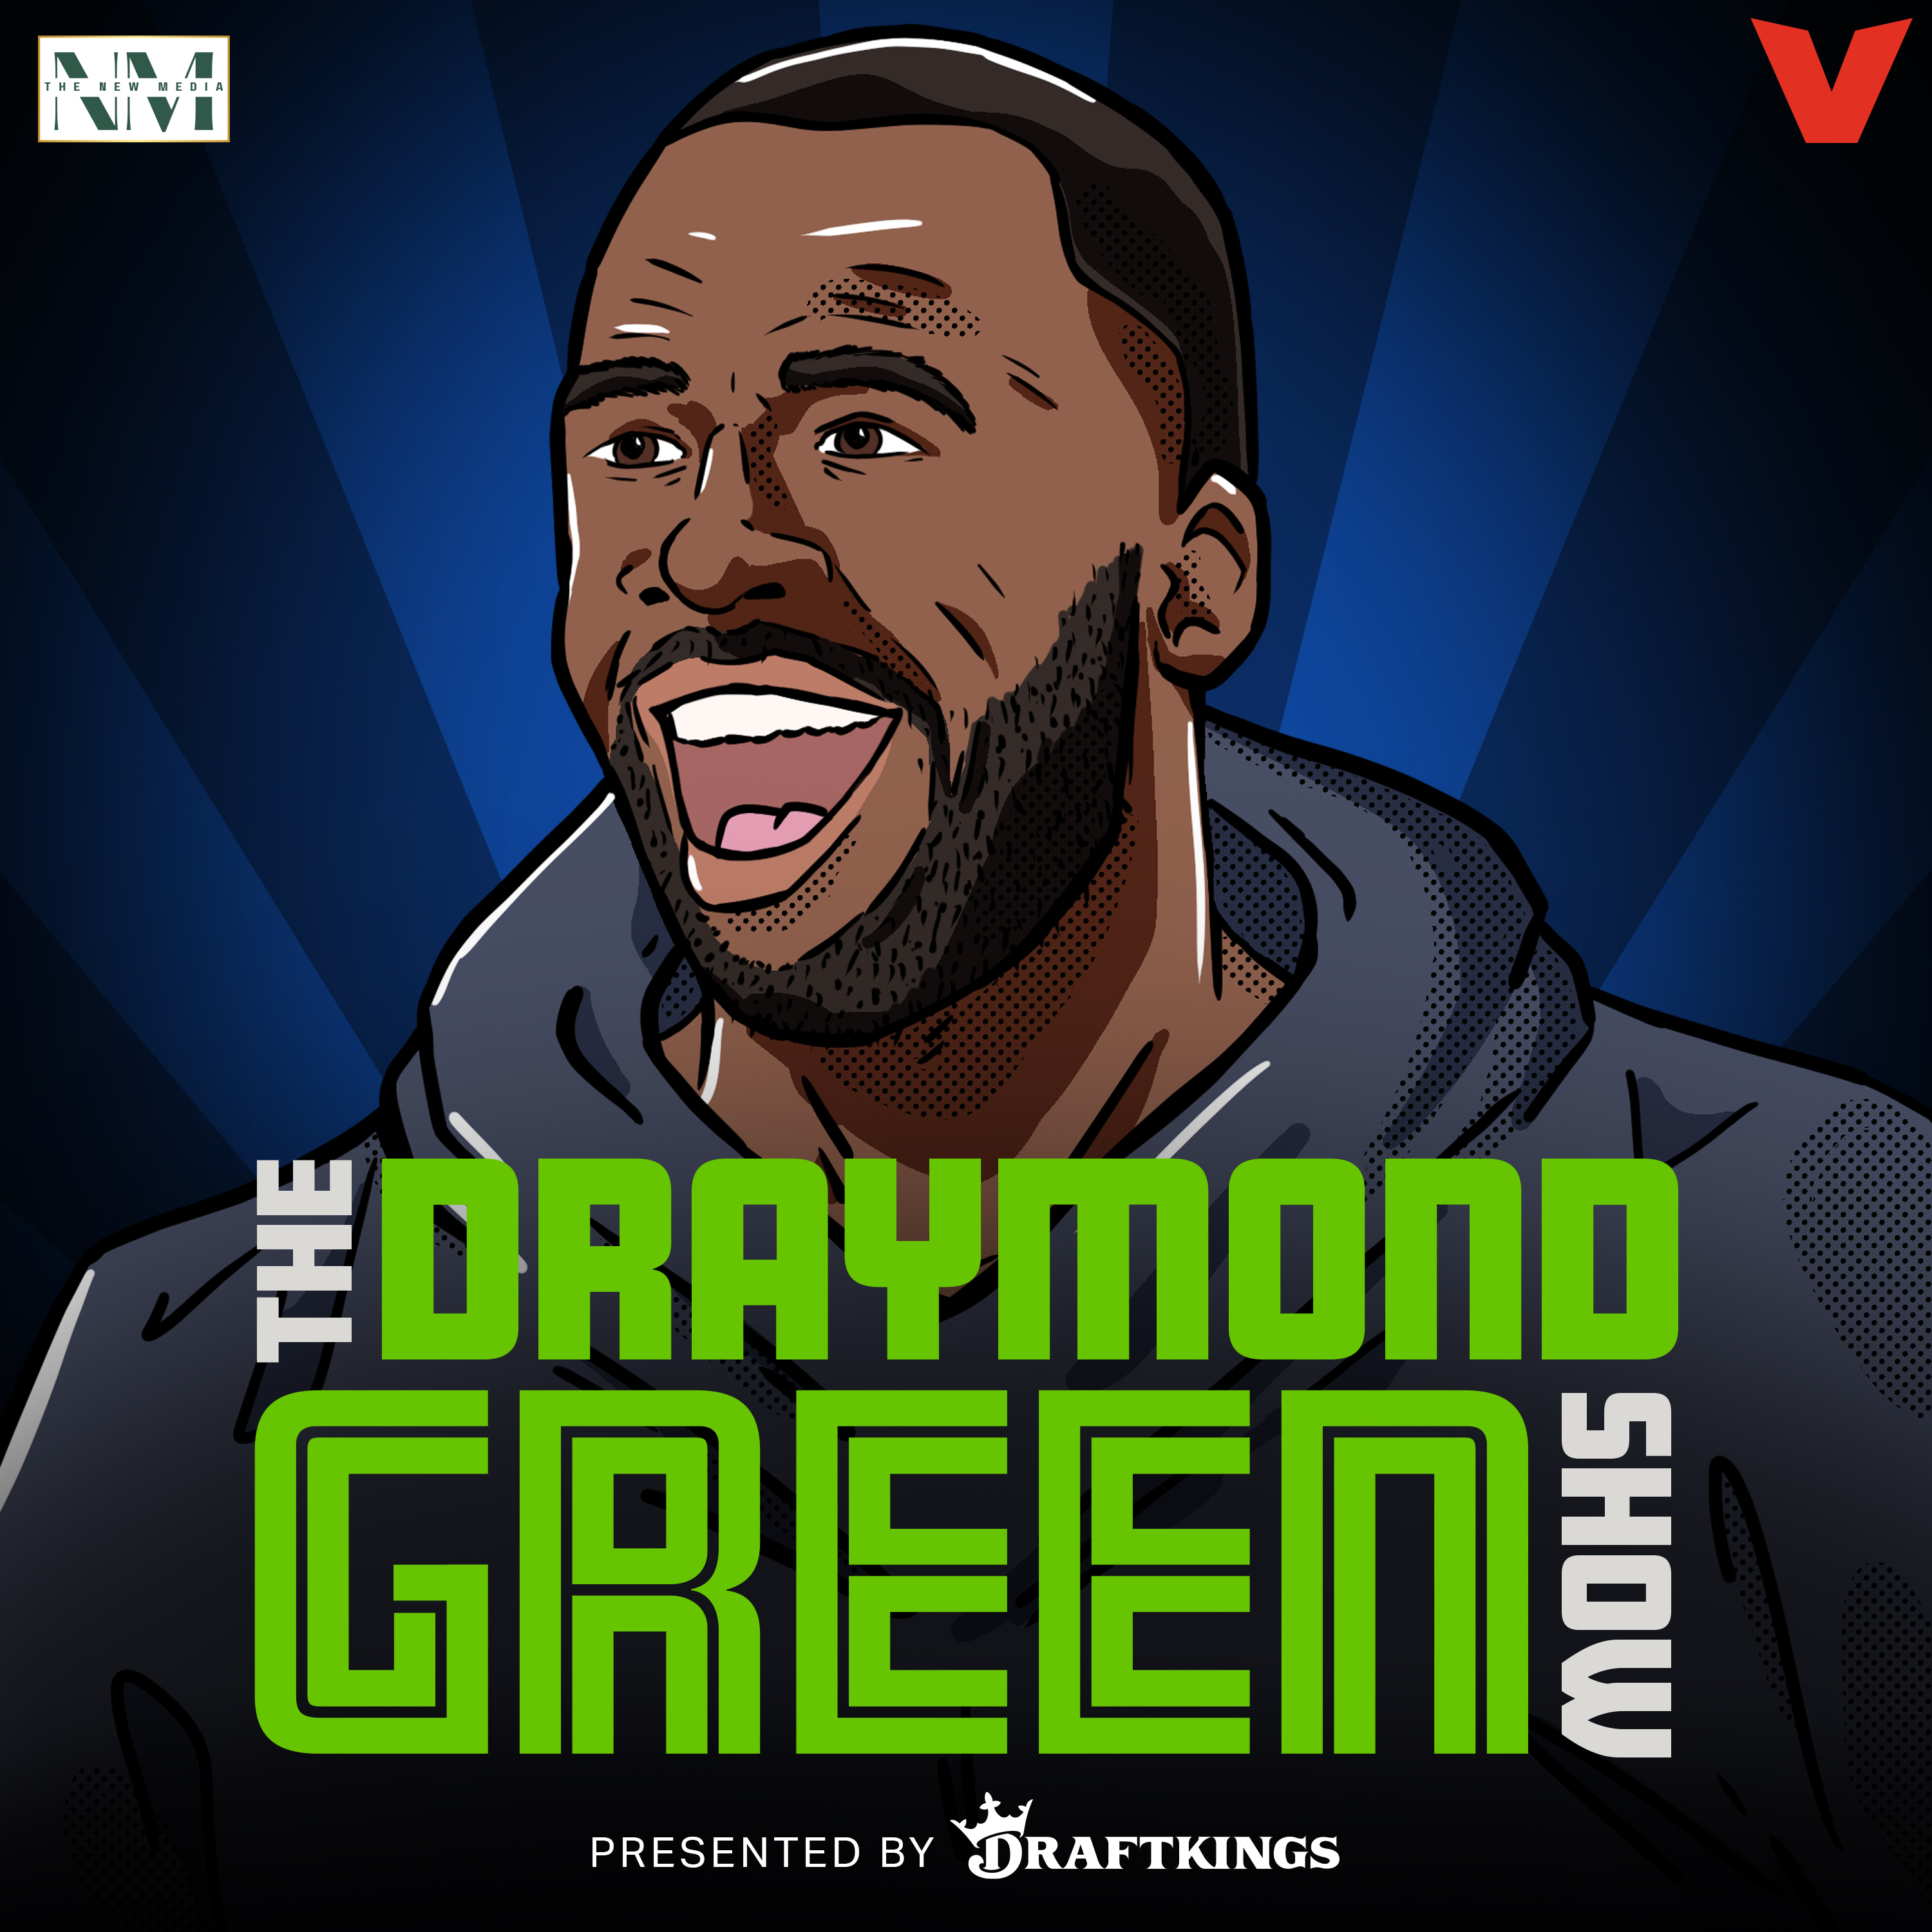 The Draymond Green Show podcast